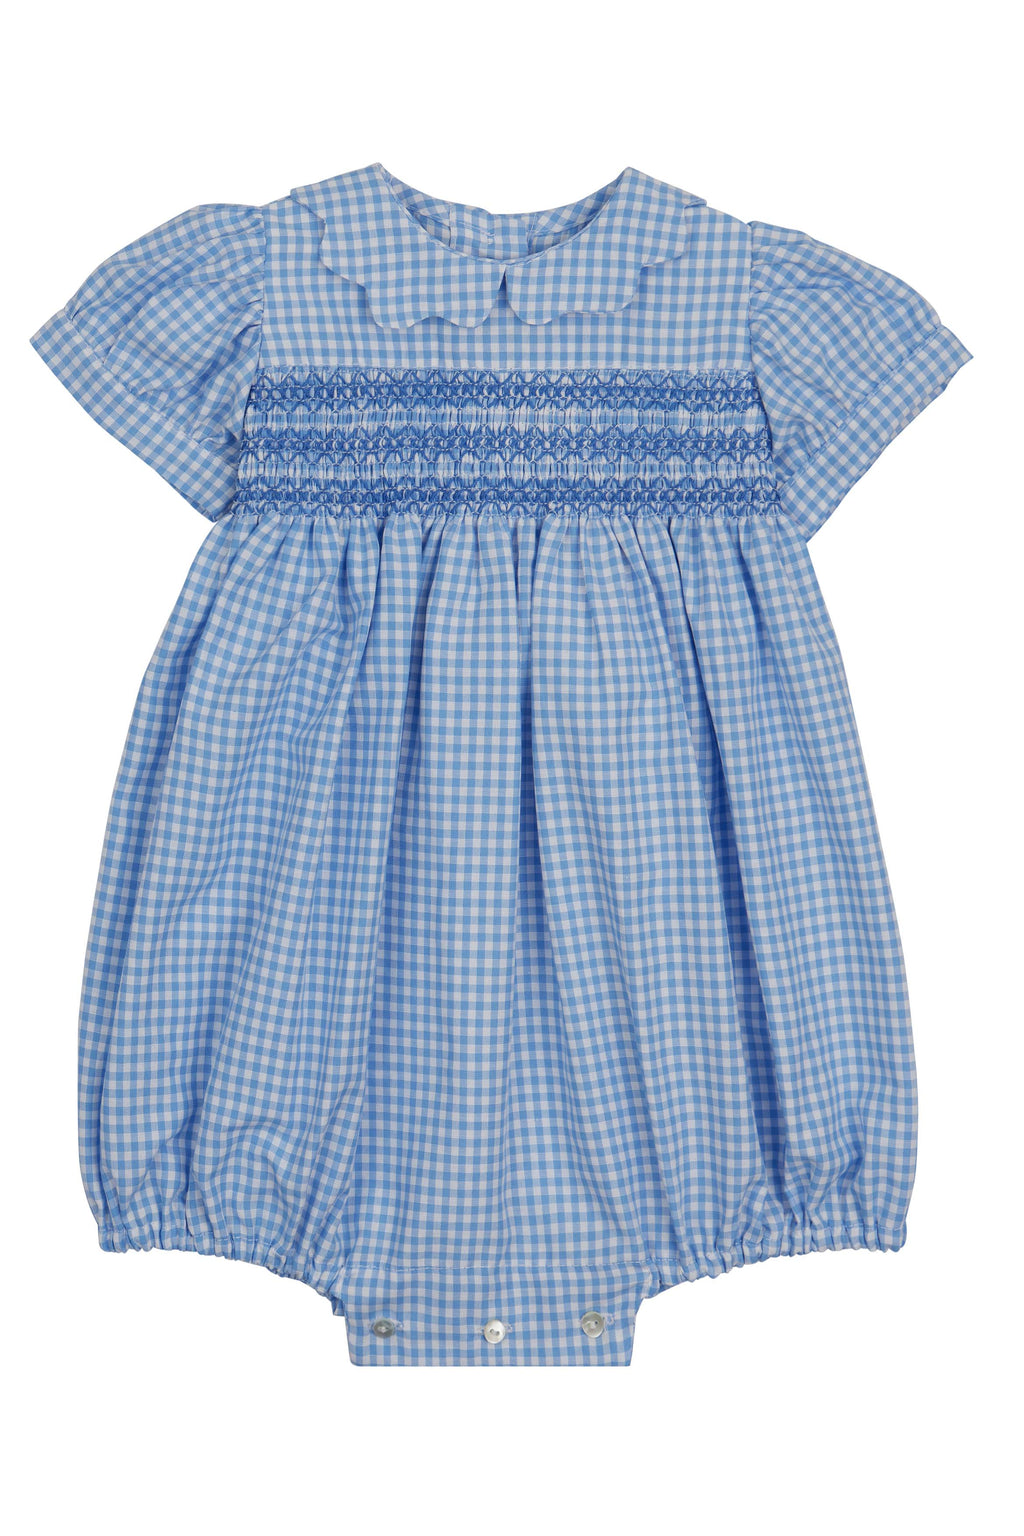 GINGHAM CHECK ROMPER WITH SMOCKING